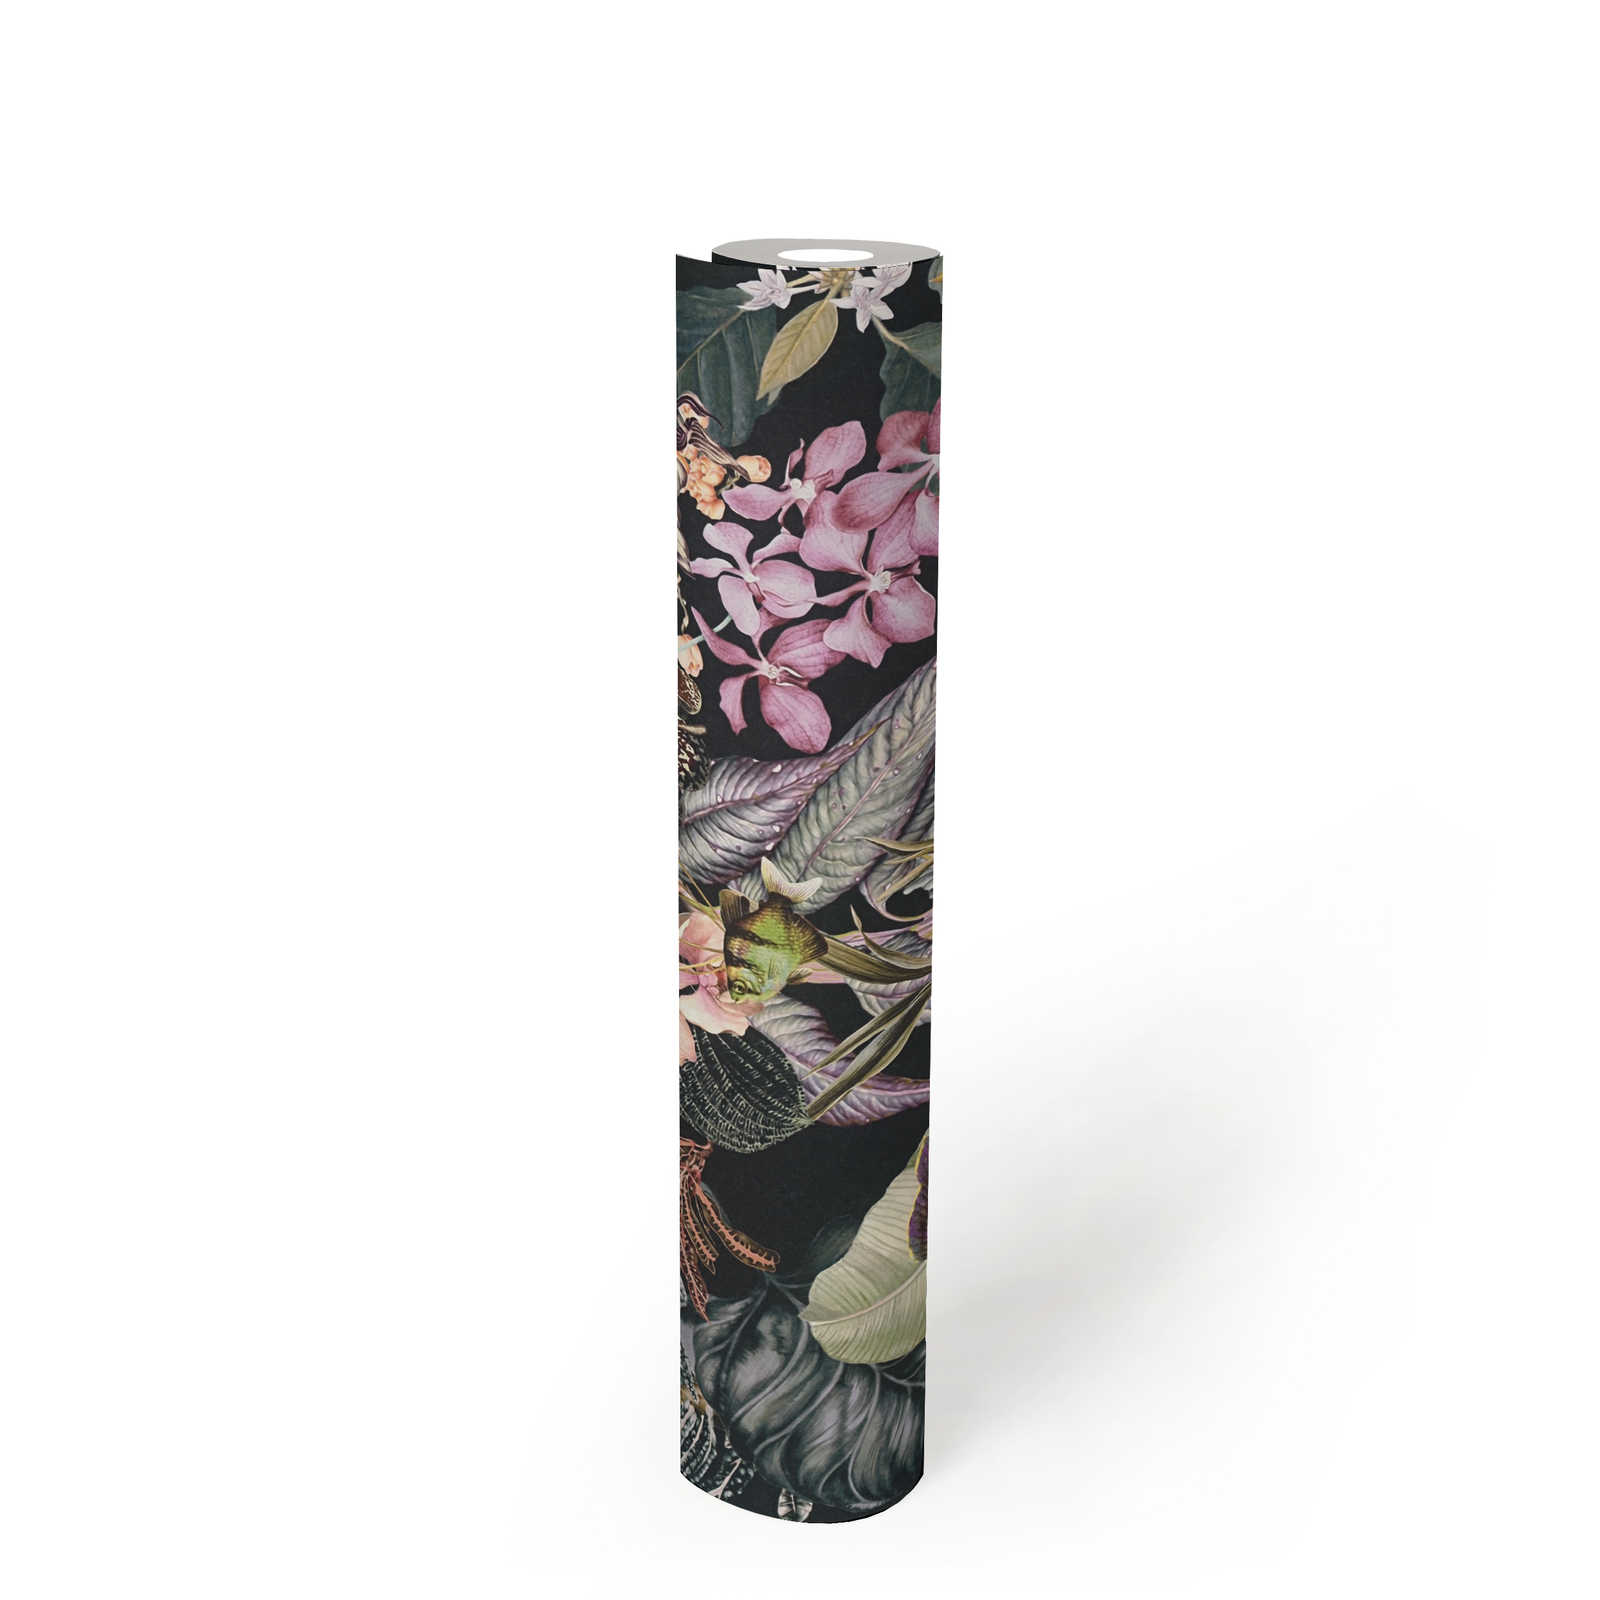             Flora & Fauna floral wallpaper with black background
        